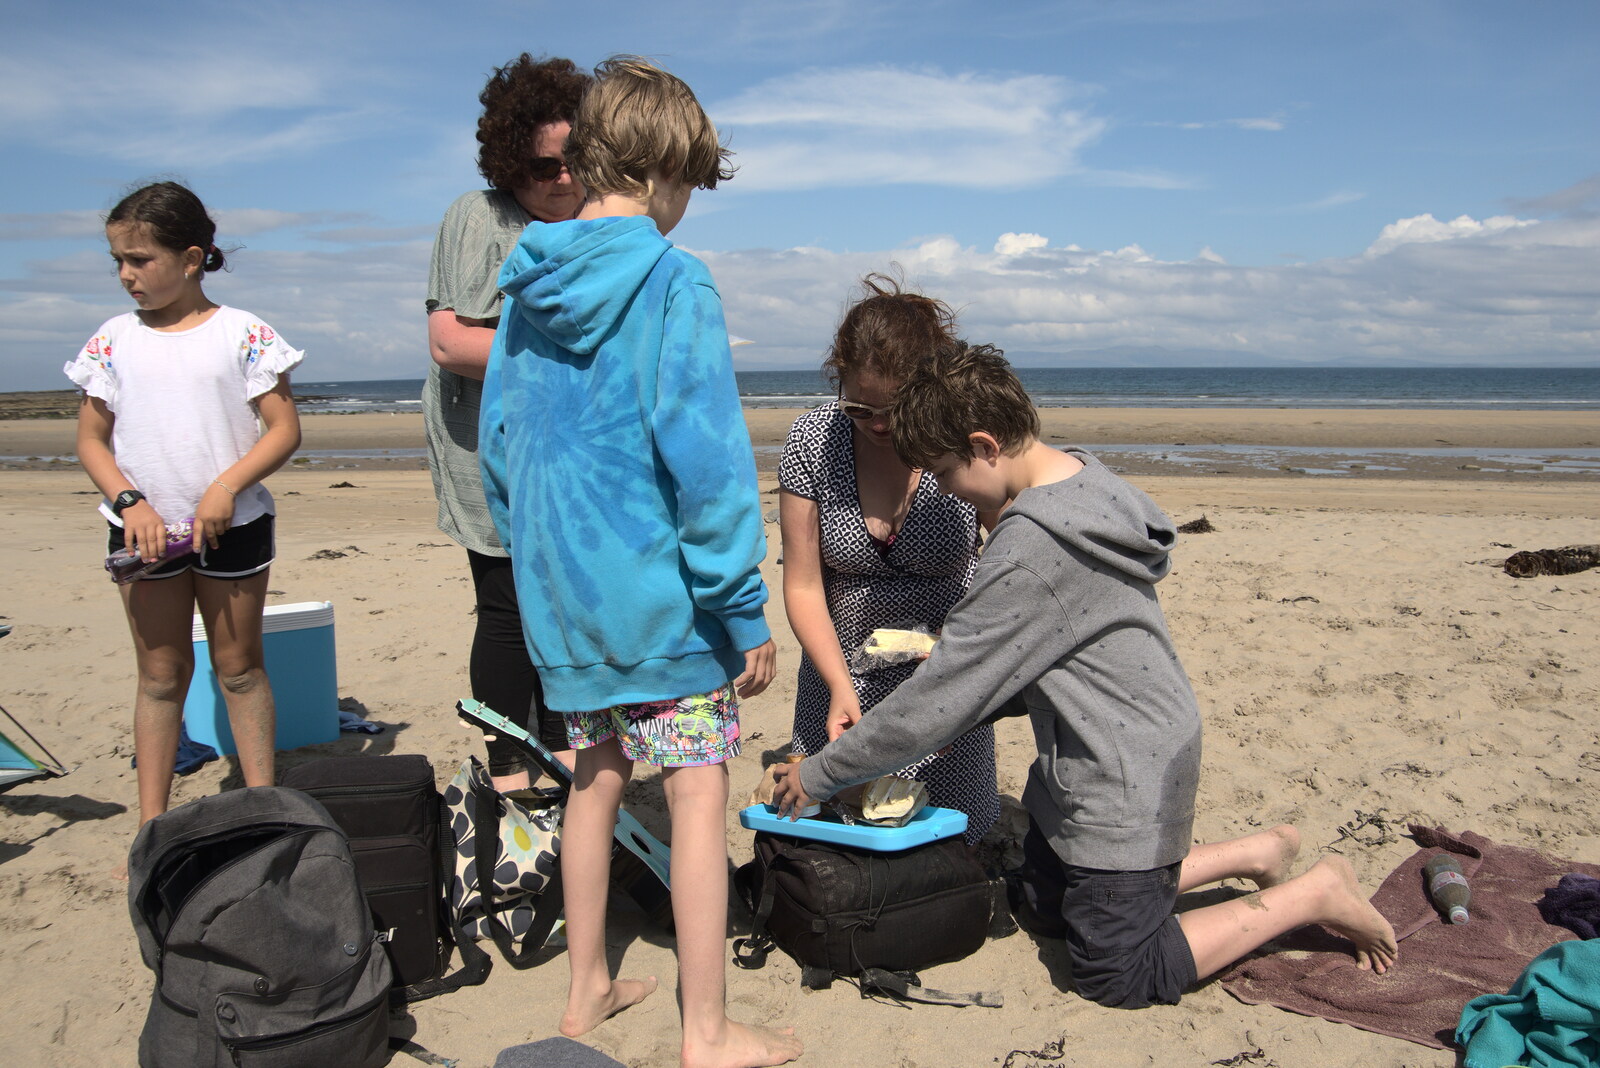 Pints of Guinness and Streedagh Beach, Grange and Sligo, Ireland - 9th August 2021: It's picnic time